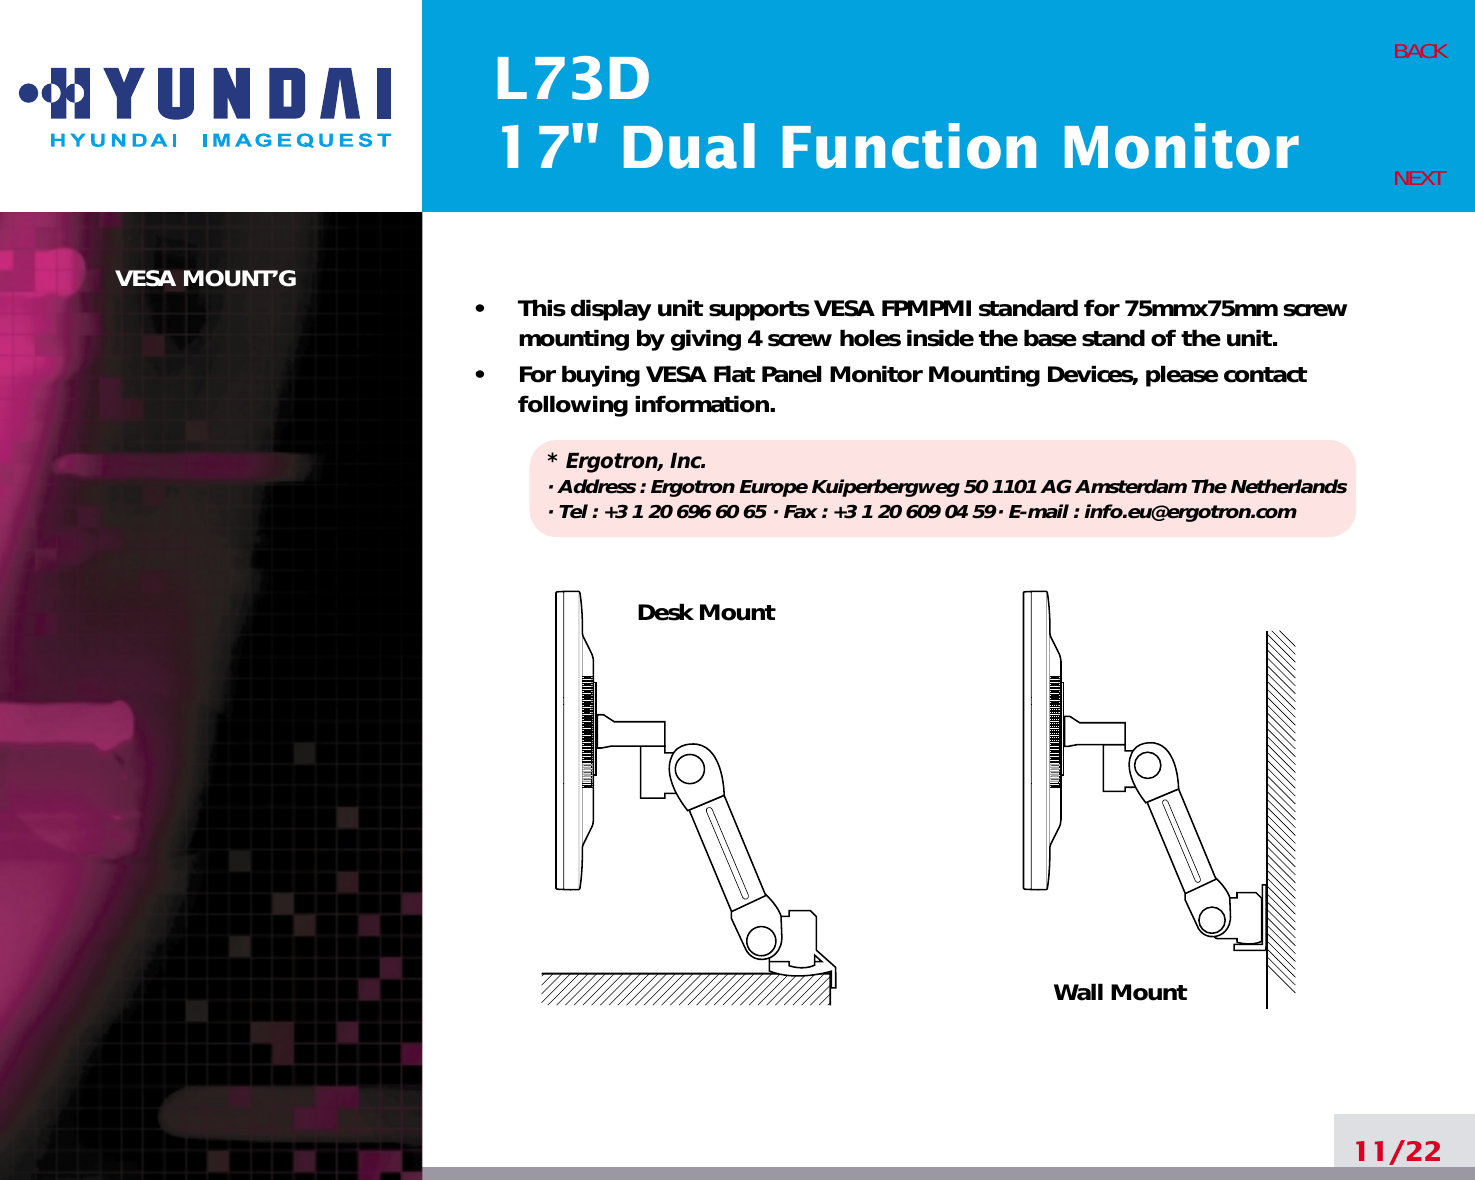 L73D17&quot; Dual Function MonitorVESA MOUNT’G•     This display unit supports VESA FPMPMI standard for 75mmx75mm screwmounting by giving 4 screw holes inside the base stand of the unit.•     For buying VESA Flat Panel Monitor Mounting Devices, please contactfollowing information.* Ergotron, Inc.· Address : Ergotron Europe Kuiperbergweg 50 1101 AG Amsterdam The Netherlands· Tel : +3 1 20 696 60 65 · Fax : +3 1 20 609 04 59· E-mail : info.eu@ergotron.com11/22BACKNEXTDesk MountWall Mount